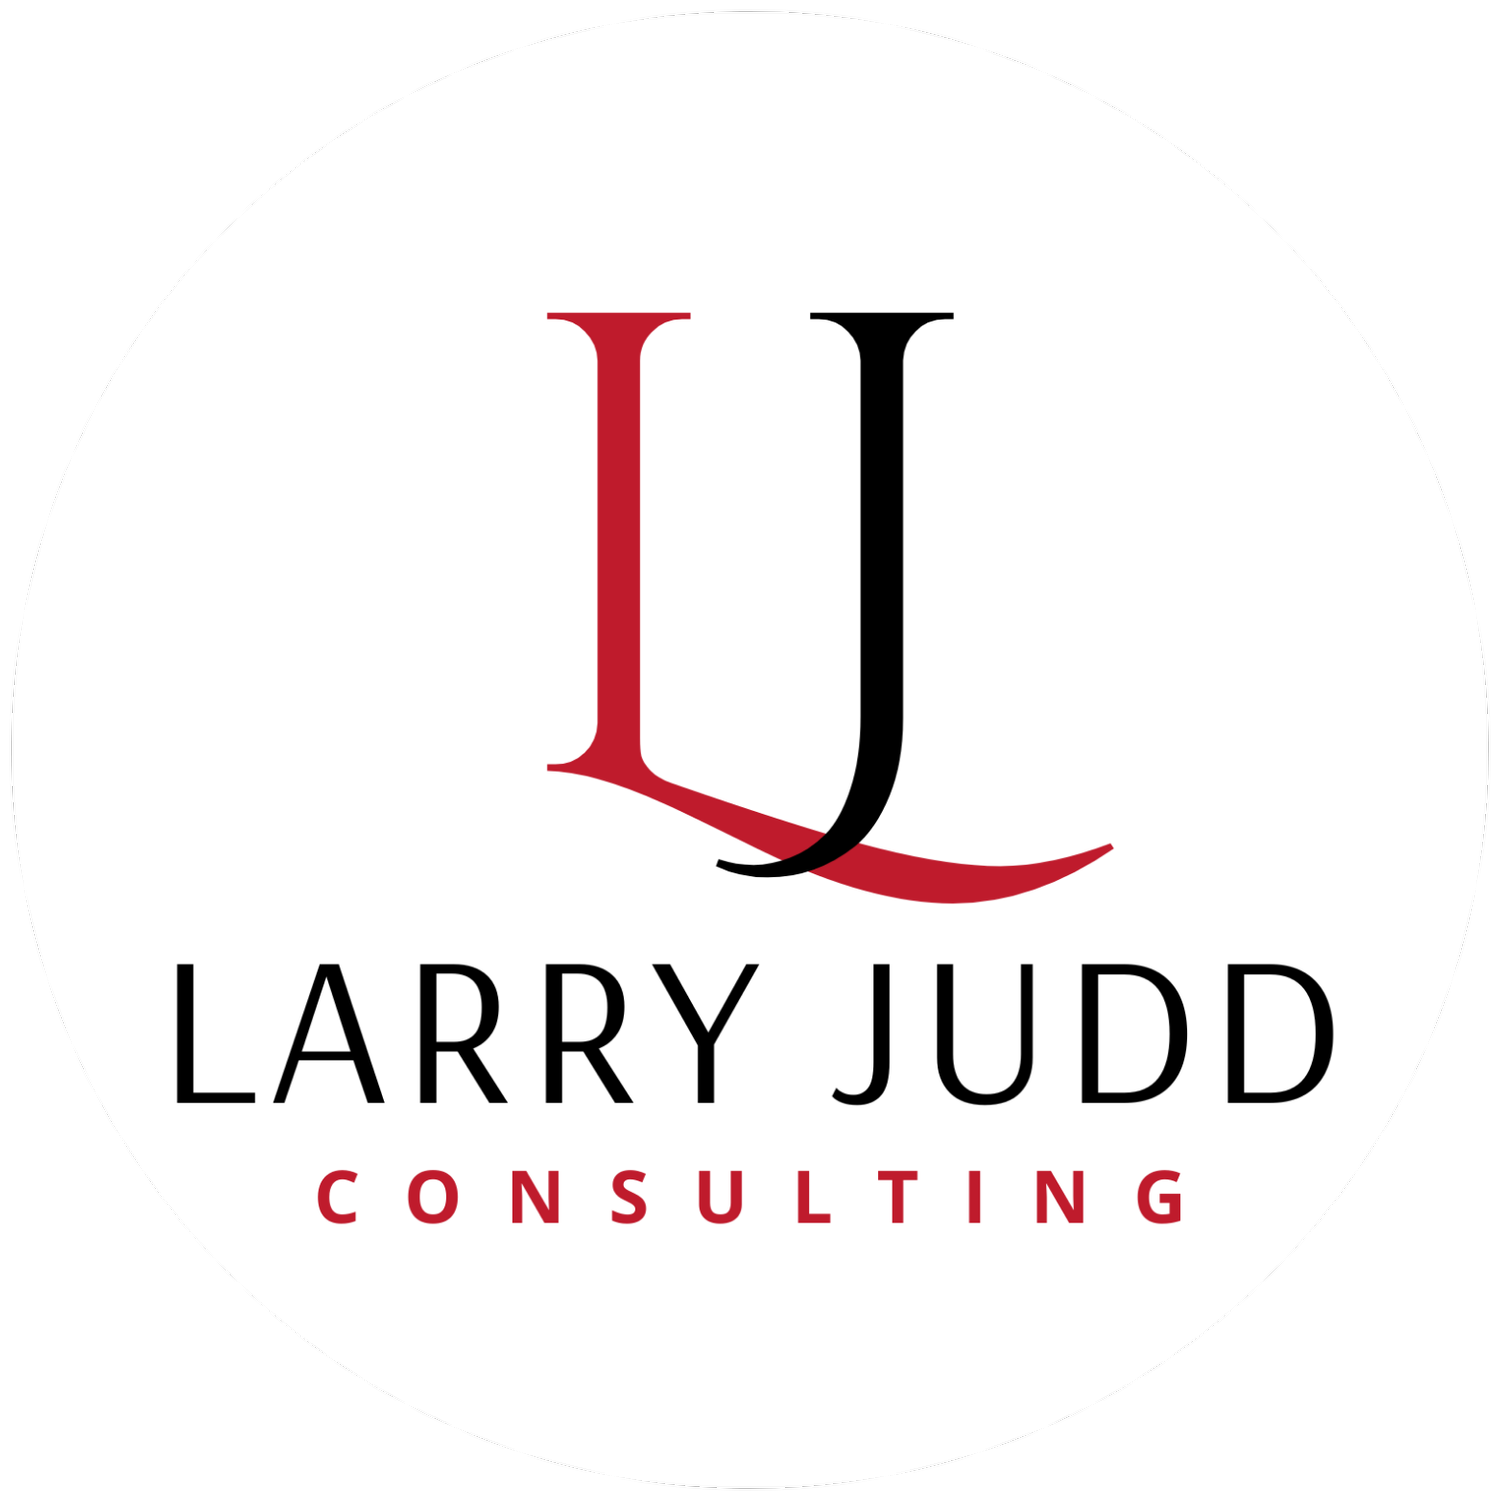 Larry Judd Consulting